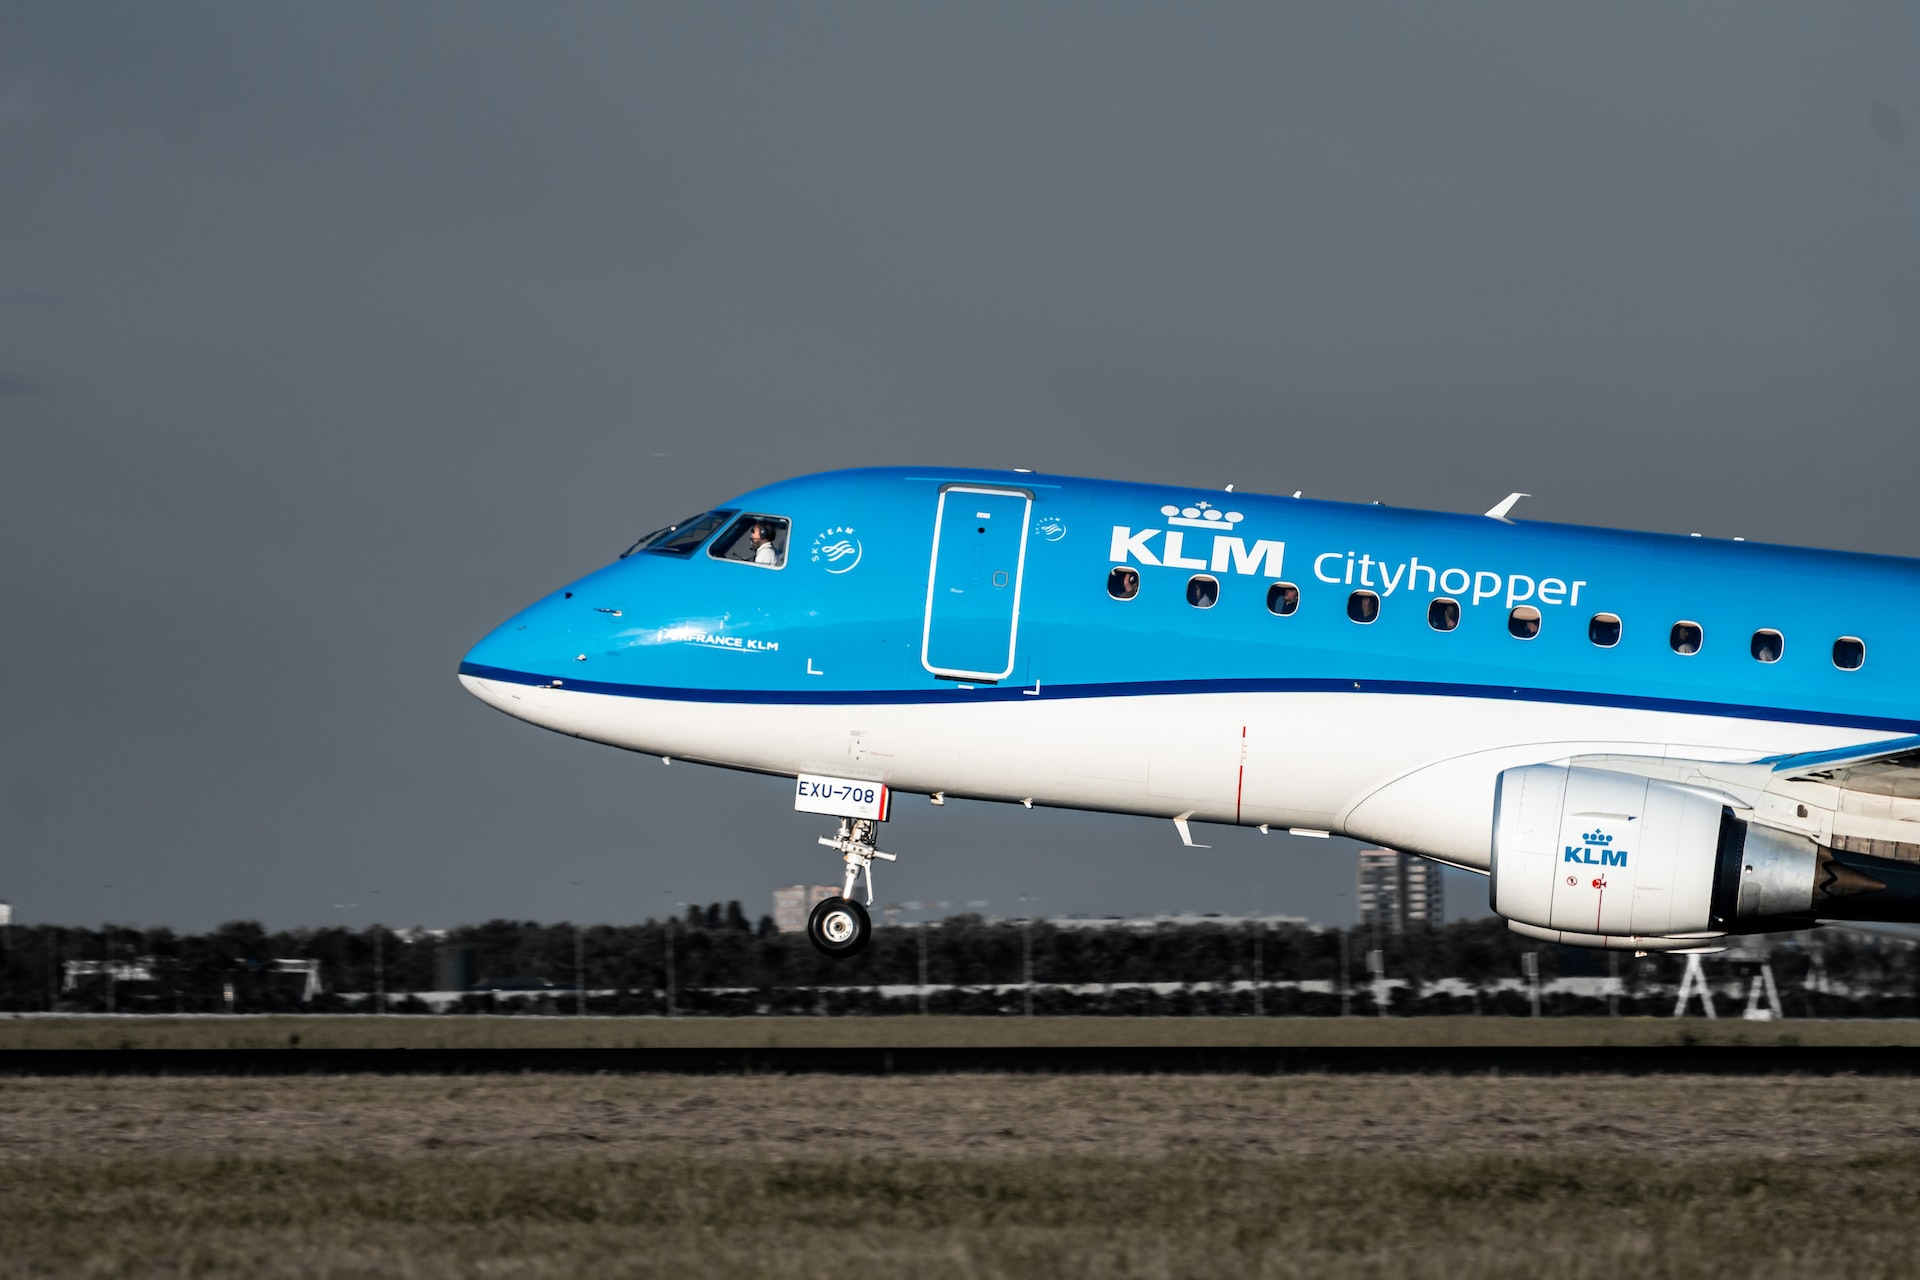 One of legacy airlines in Europe KLM aircraft taking off.